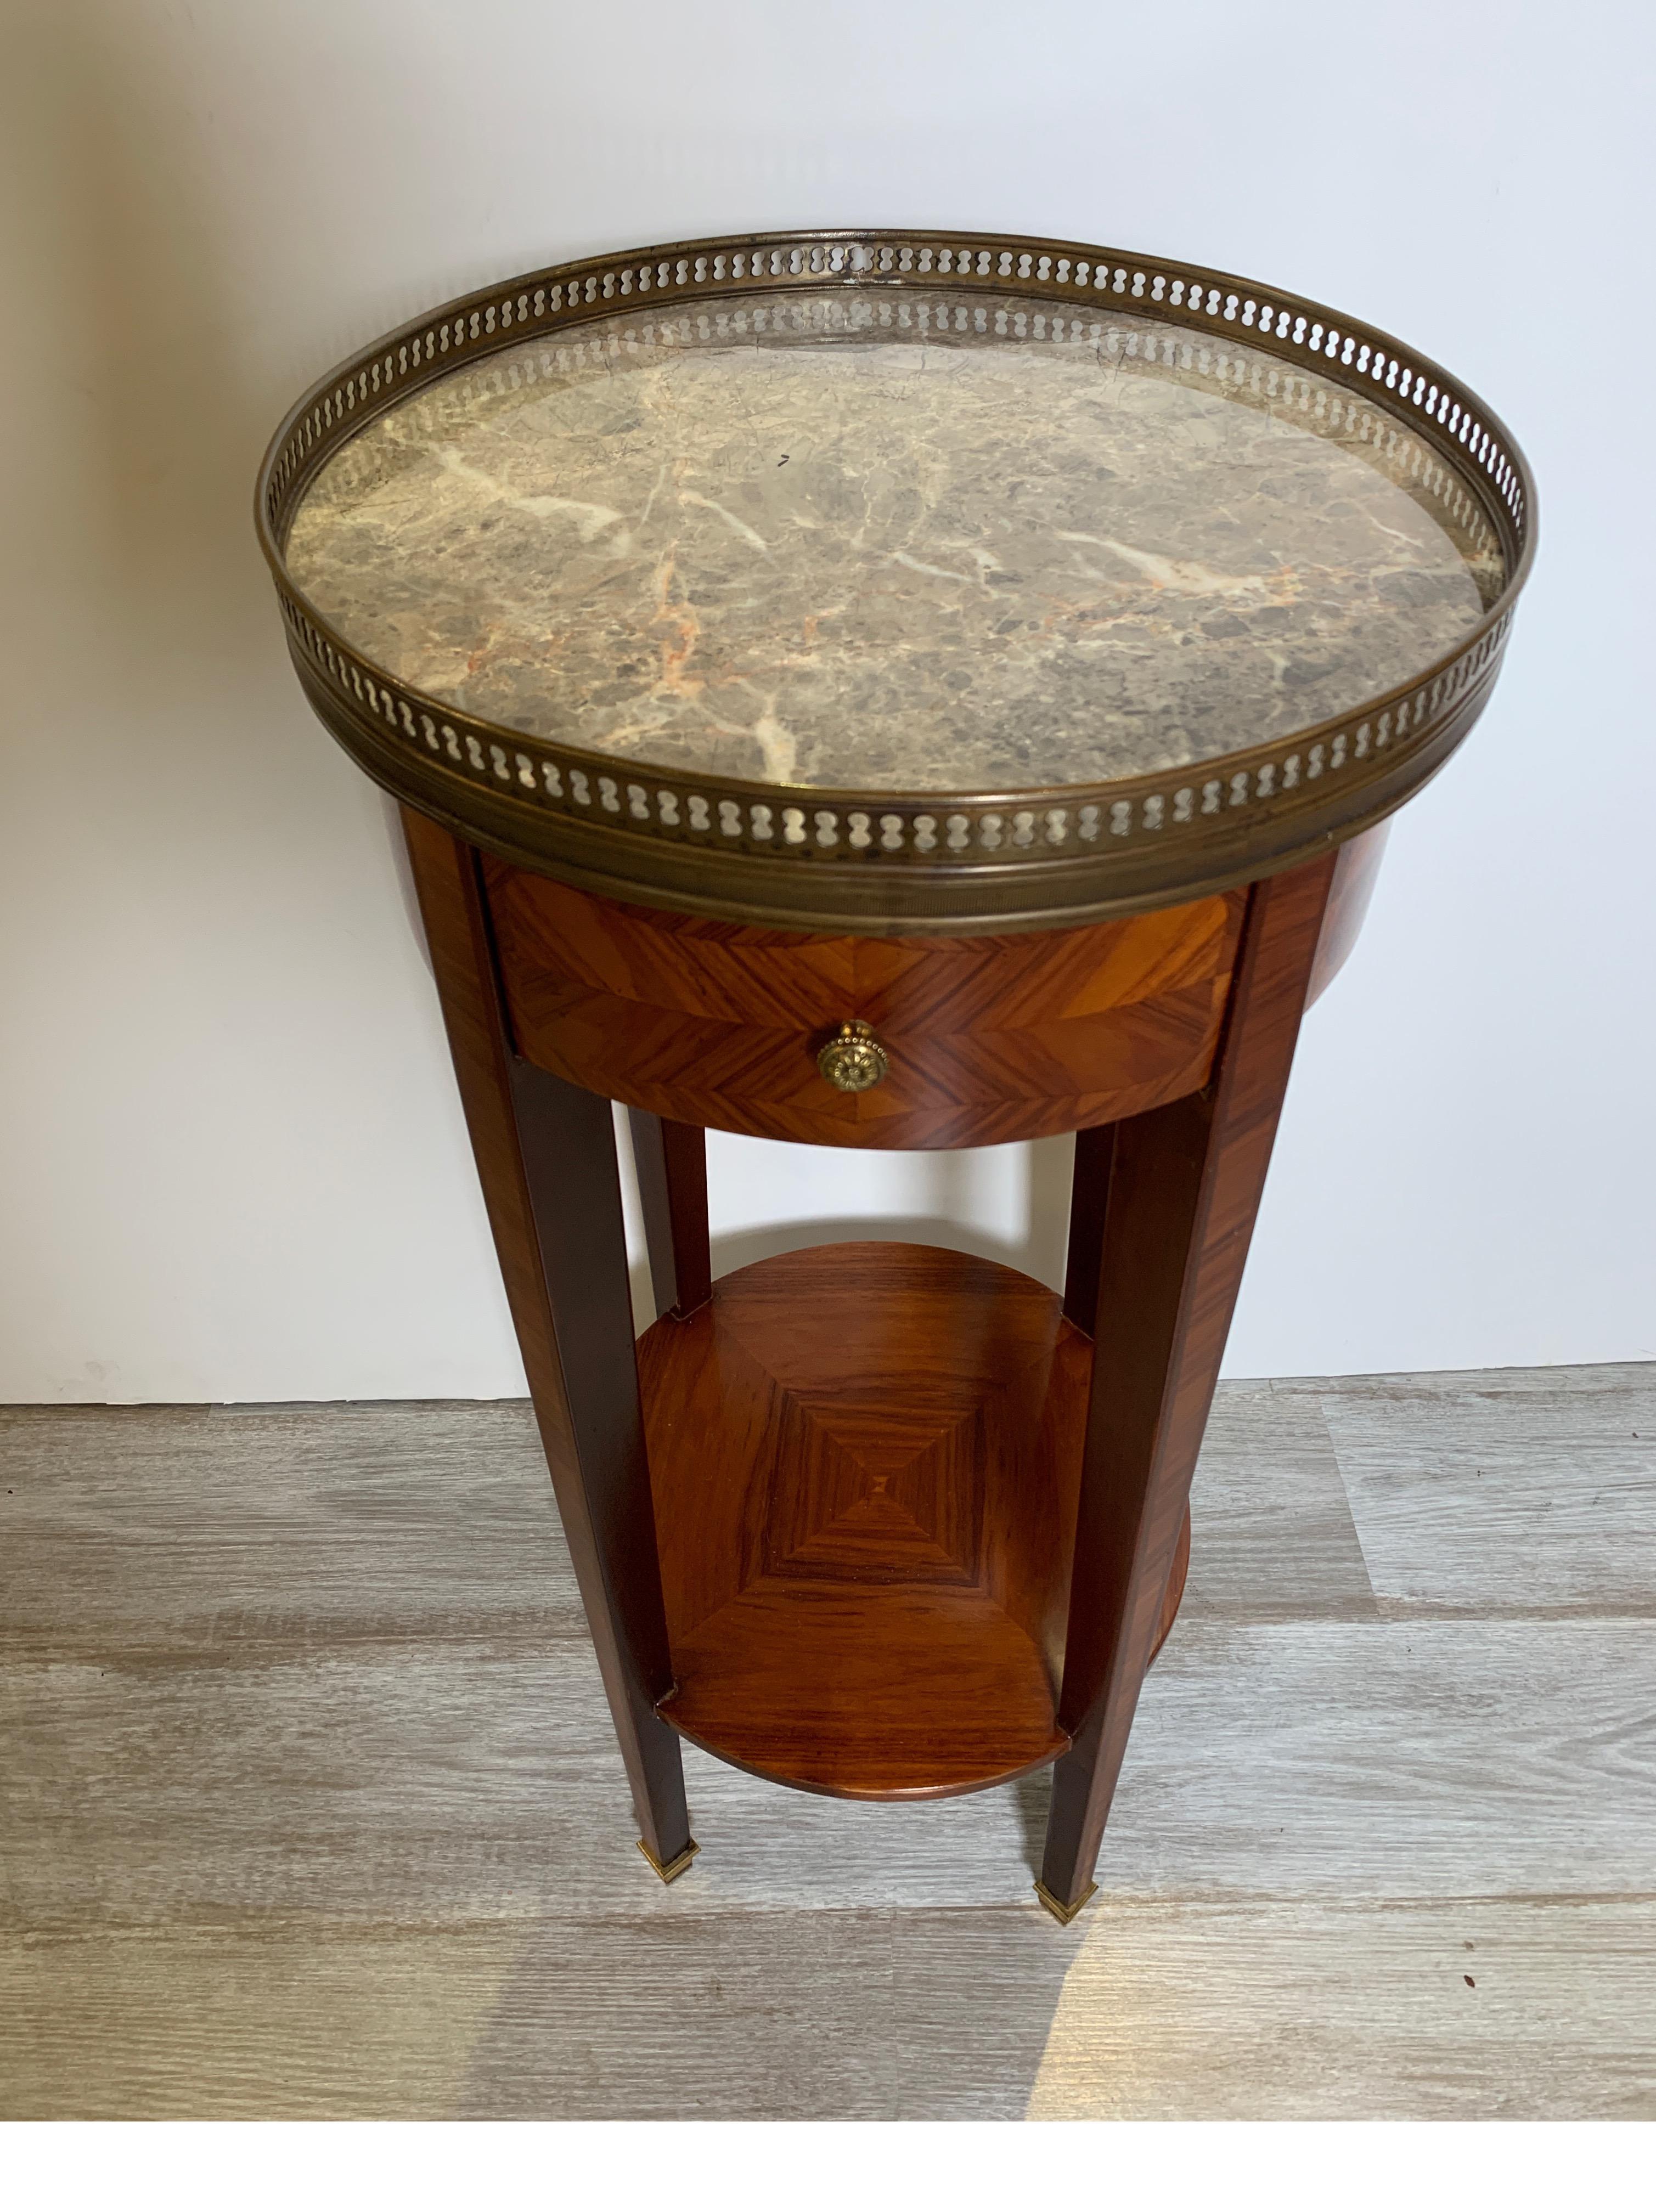 Diminutive round mahogany table with brass gallery edge and marble top Louis XVI style. The top resting on four tapering legs with lower shelf. Elegant neoclassical style.